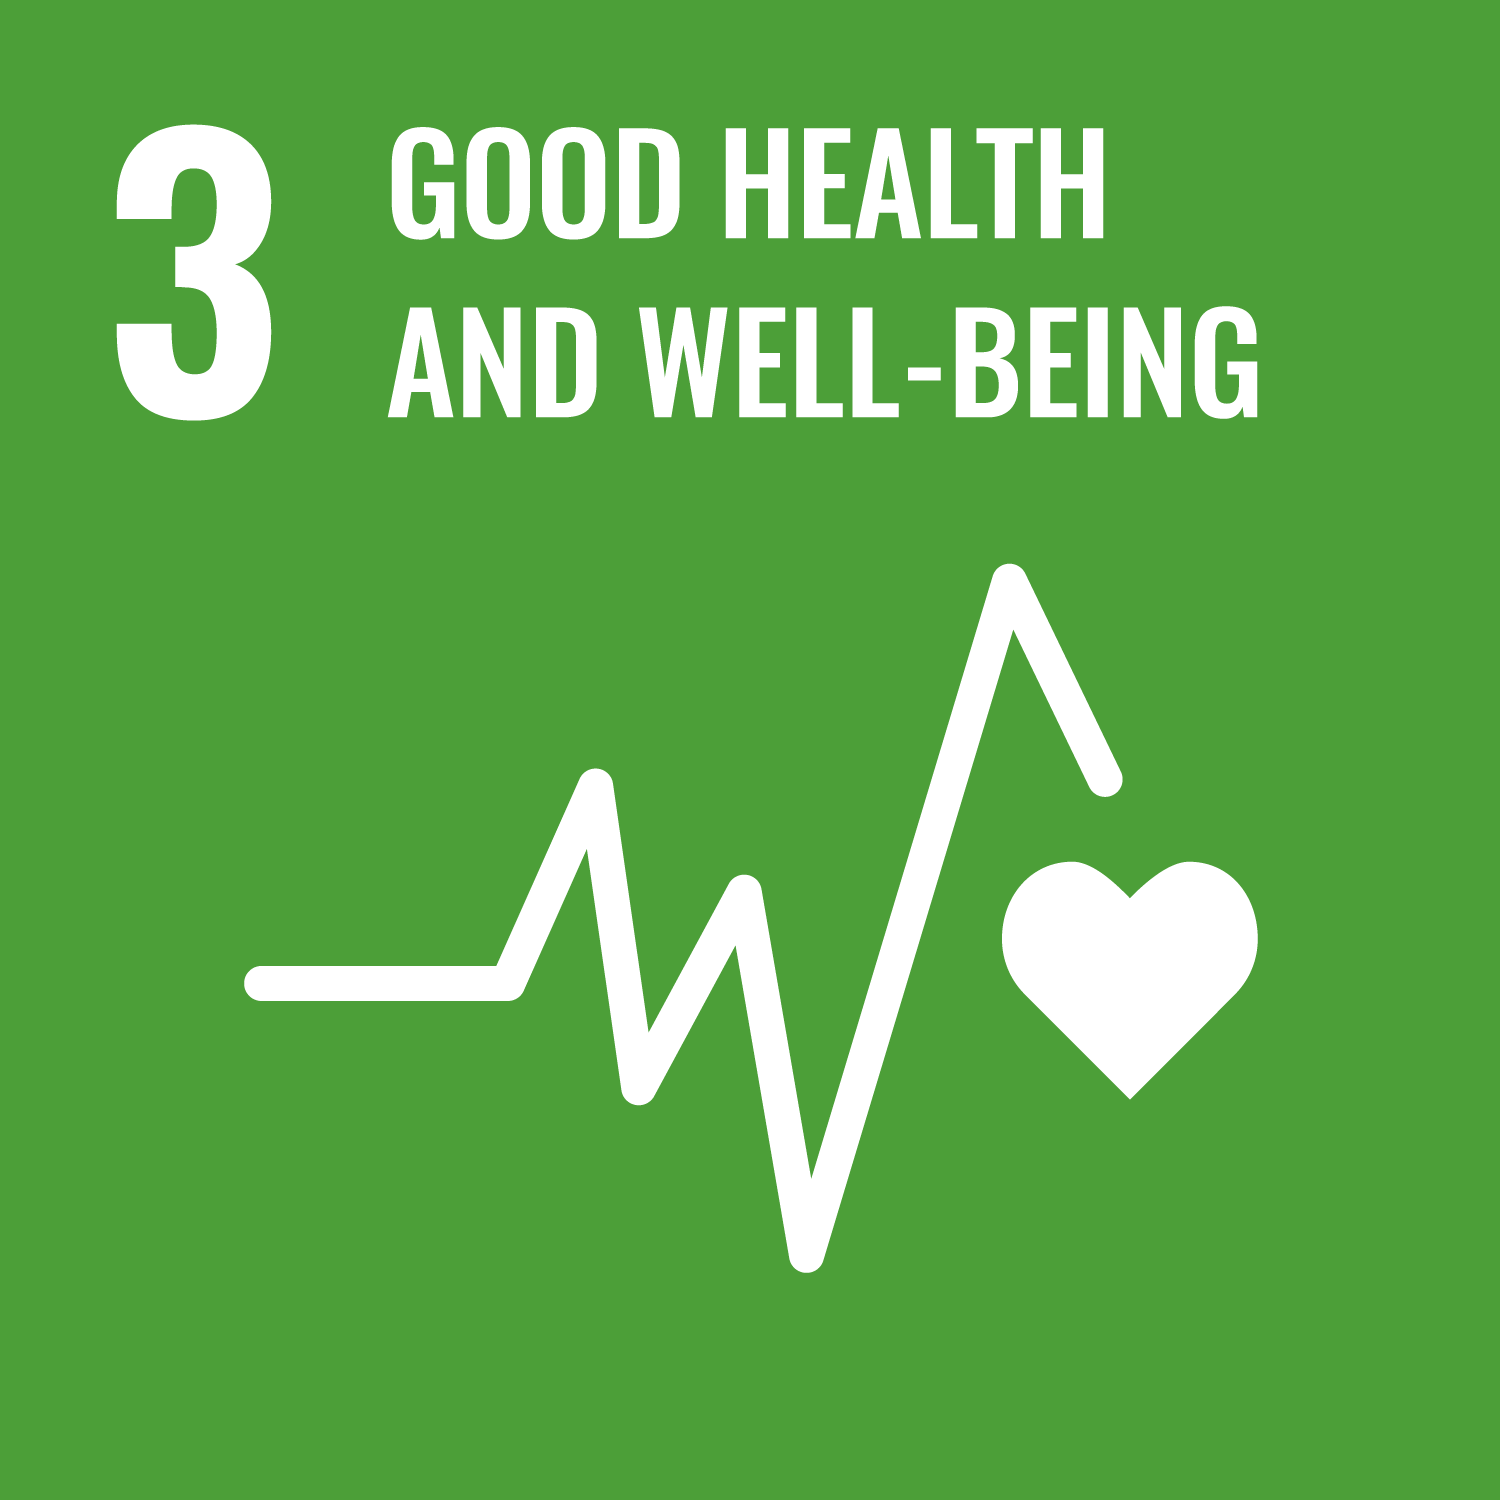 United Nations Sustainable Development Goal Number 3: Good health and well being